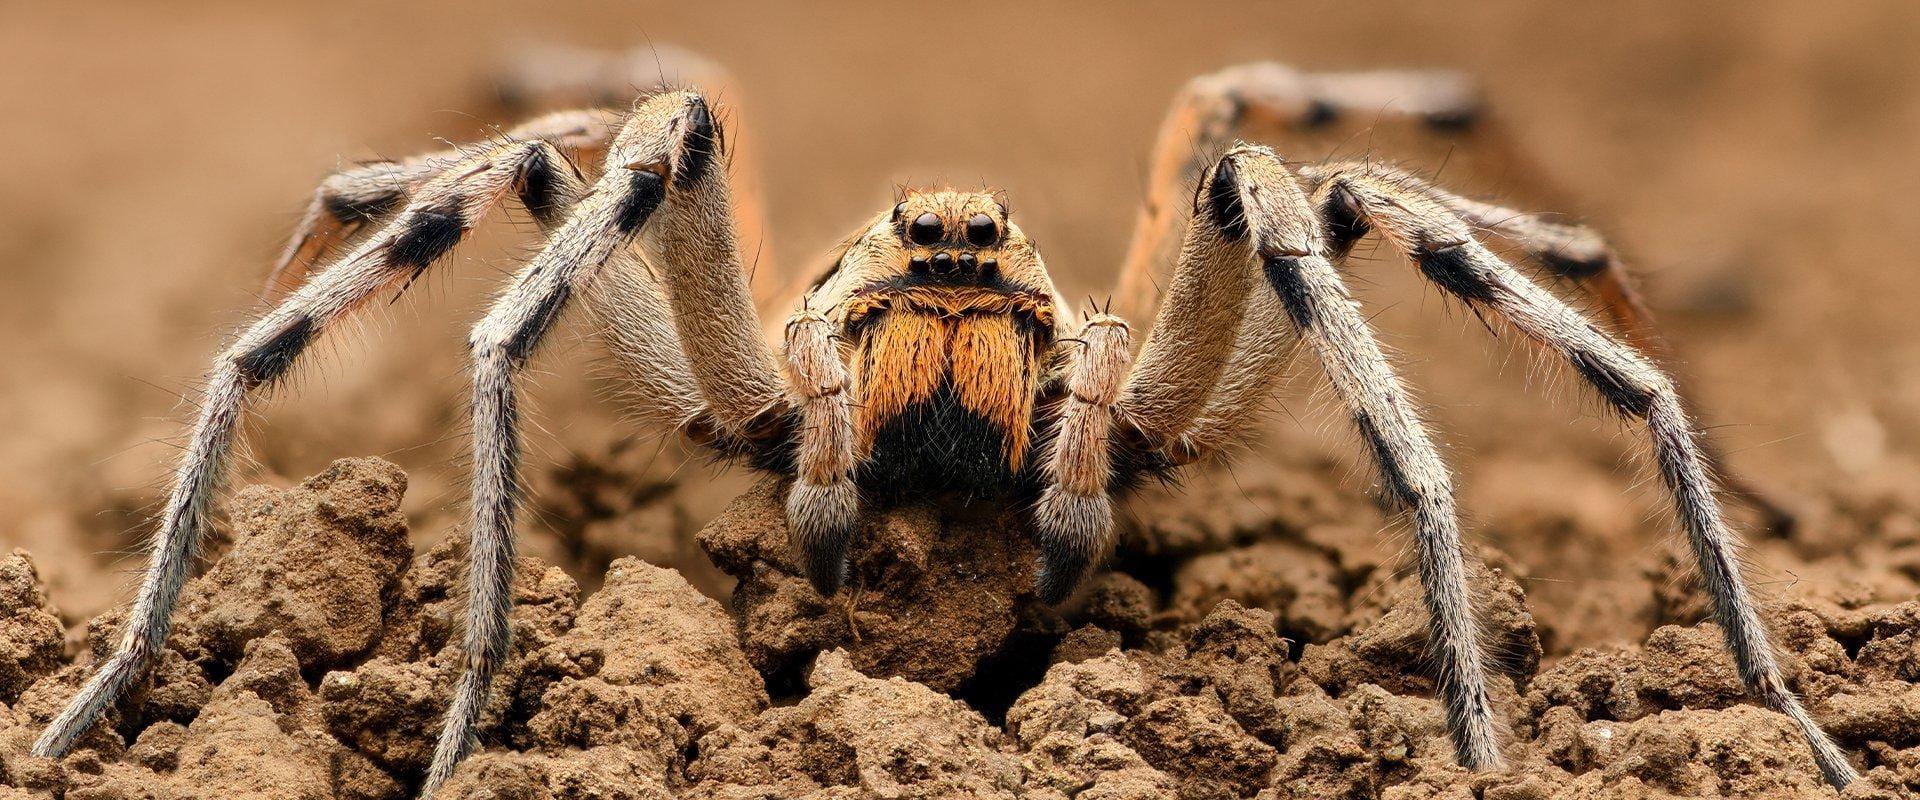 wolf spider crawling on dirt